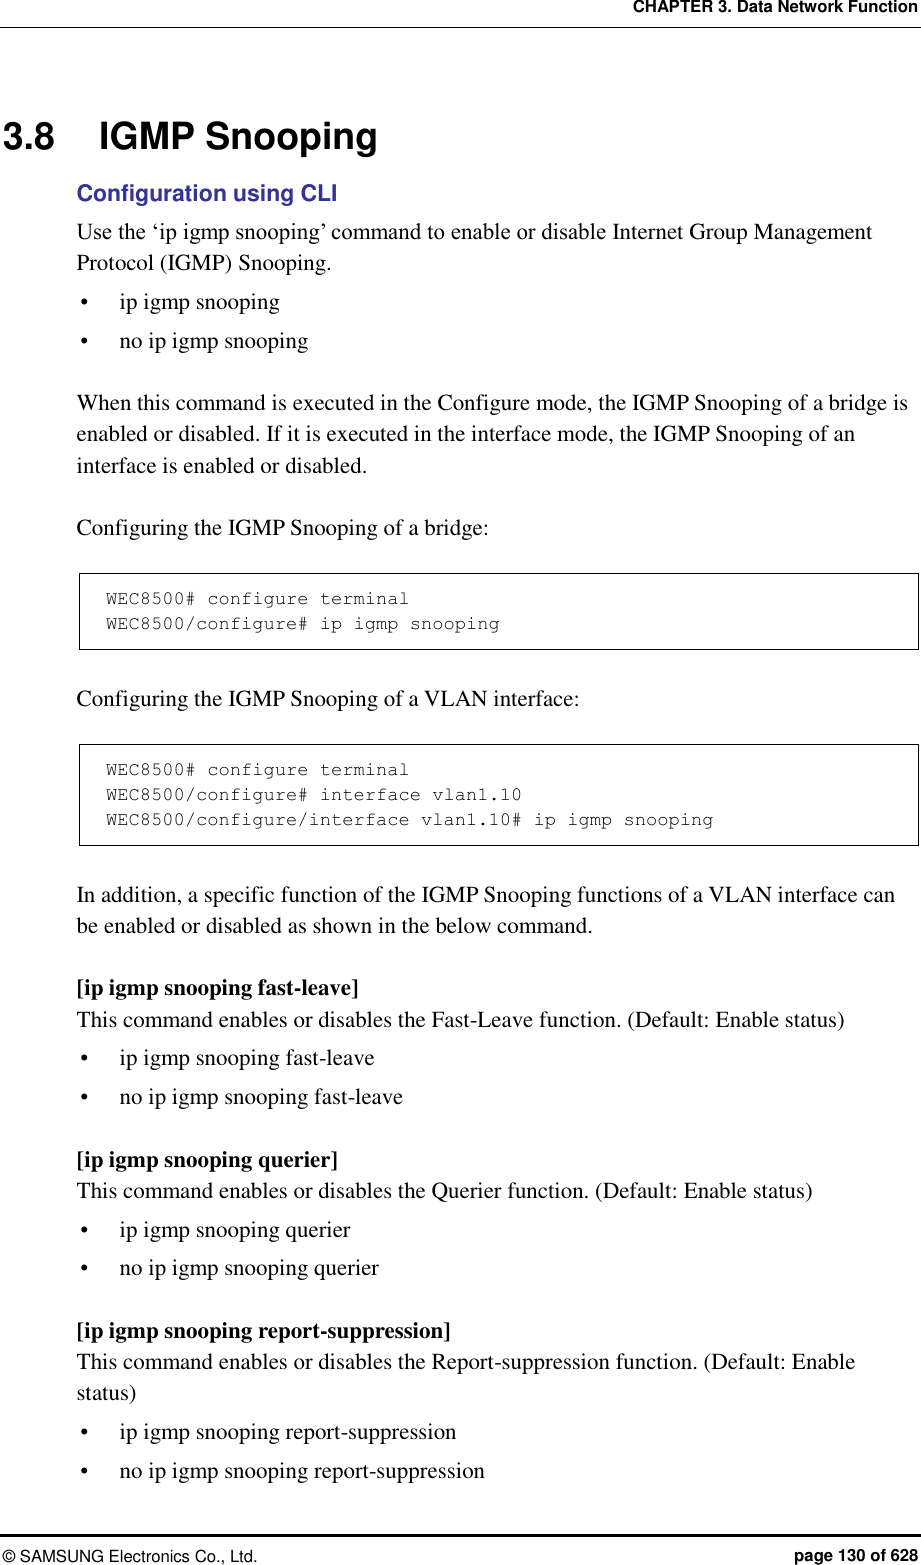 CHAPTER 3. Data Network Function ©  SAMSUNG Electronics Co., Ltd.  page 130 of 628 3.8  IGMP Snooping Configuration using CLI Use the ‘ip igmp snooping’ command to enable or disable Internet Group Management Protocol (IGMP) Snooping.  ip igmp snooping  no ip igmp snooping  When this command is executed in the Configure mode, the IGMP Snooping of a bridge is enabled or disabled. If it is executed in the interface mode, the IGMP Snooping of an interface is enabled or disabled.  Configuring the IGMP Snooping of a bridge:  WEC8500# configure terminal WEC8500/configure# ip igmp snooping  Configuring the IGMP Snooping of a VLAN interface:  WEC8500# configure terminal WEC8500/configure# interface vlan1.10 WEC8500/configure/interface vlan1.10# ip igmp snooping  In addition, a specific function of the IGMP Snooping functions of a VLAN interface can be enabled or disabled as shown in the below command.    [ip igmp snooping fast-leave] This command enables or disables the Fast-Leave function. (Default: Enable status)  ip igmp snooping fast-leave    no ip igmp snooping fast-leave  [ip igmp snooping querier] This command enables or disables the Querier function. (Default: Enable status)  ip igmp snooping querier    no ip igmp snooping querier  [ip igmp snooping report-suppression] This command enables or disables the Report-suppression function. (Default: Enable status)  ip igmp snooping report-suppression  no ip igmp snooping report-suppression 